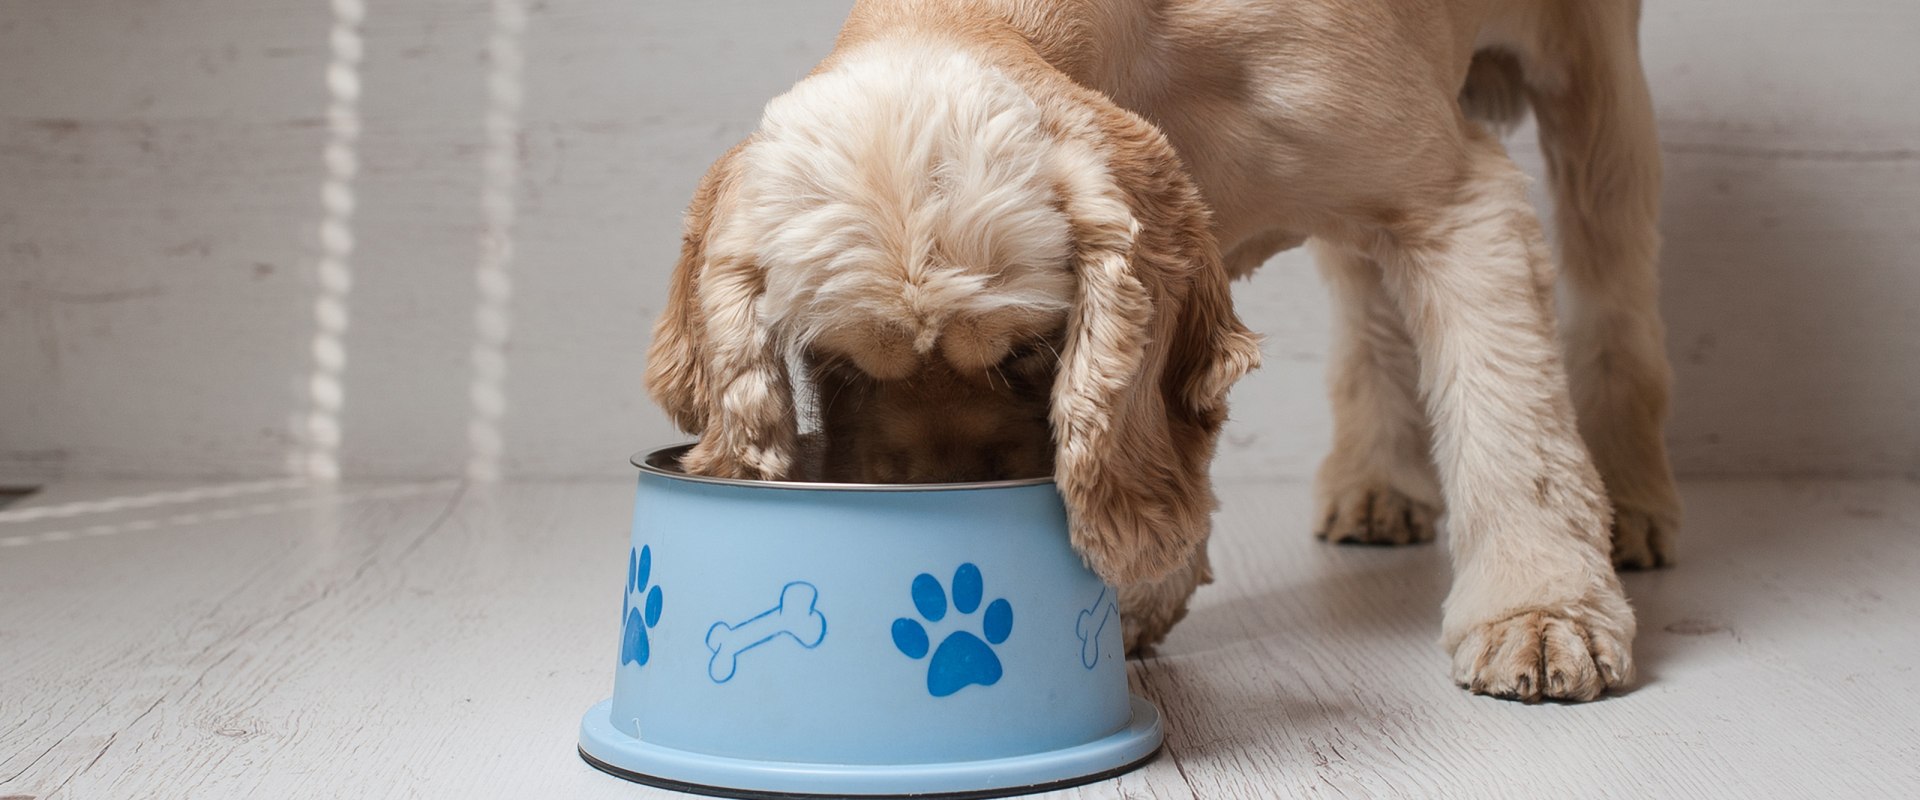 The Ultimate Guide to Pet Care: Feeding Your Pet - A Comprehensive Guide